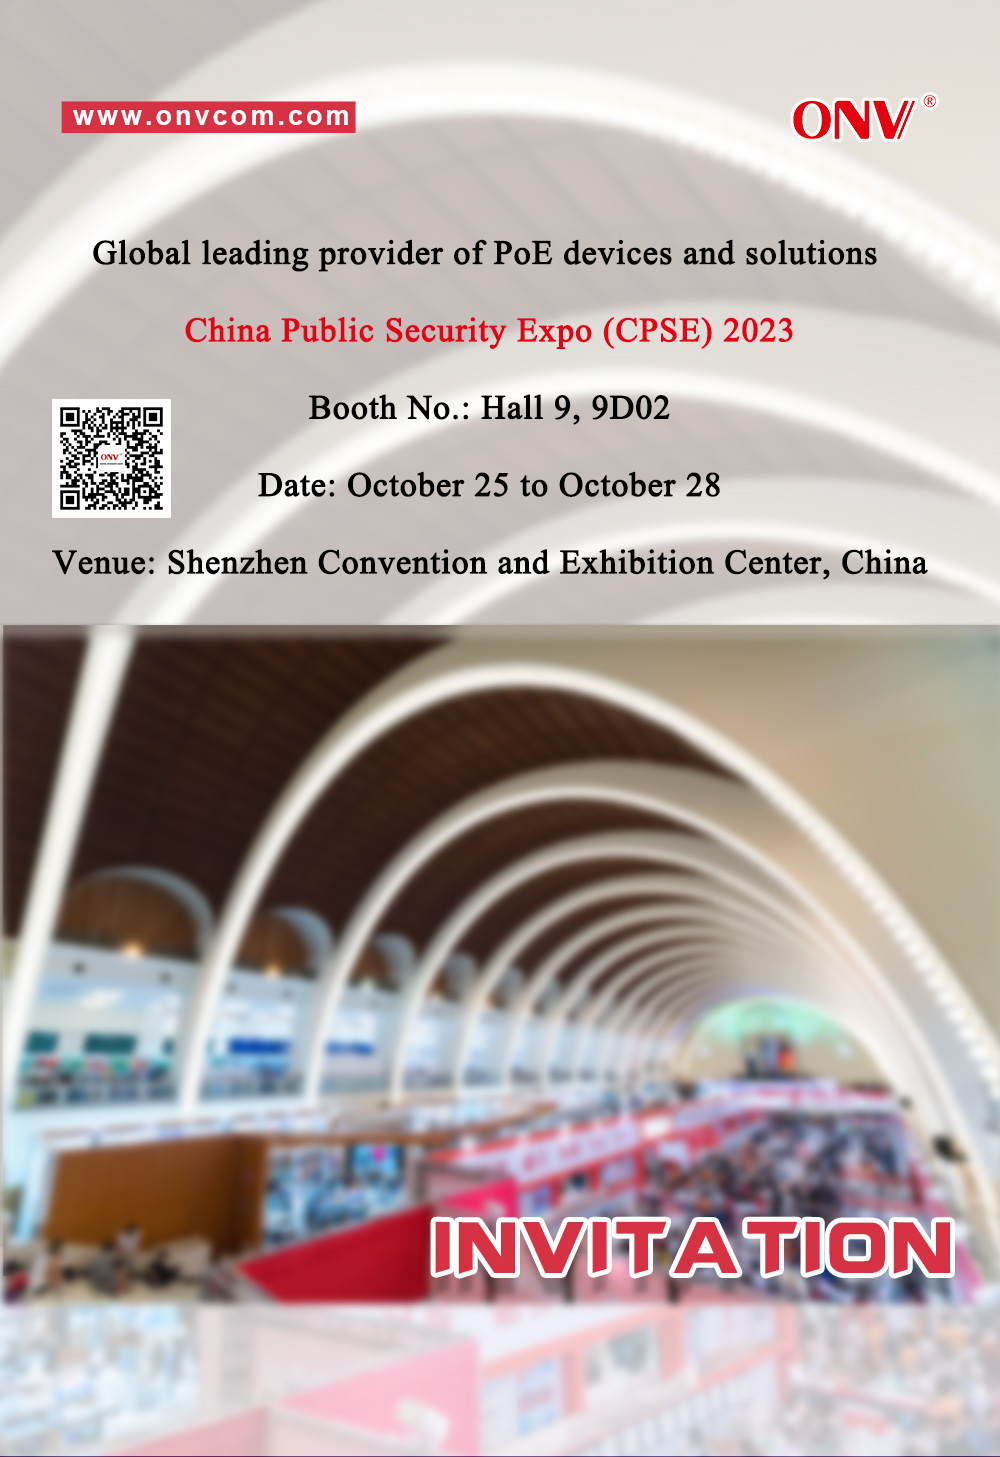 China Public Security Expo 2023, CPSE 2023